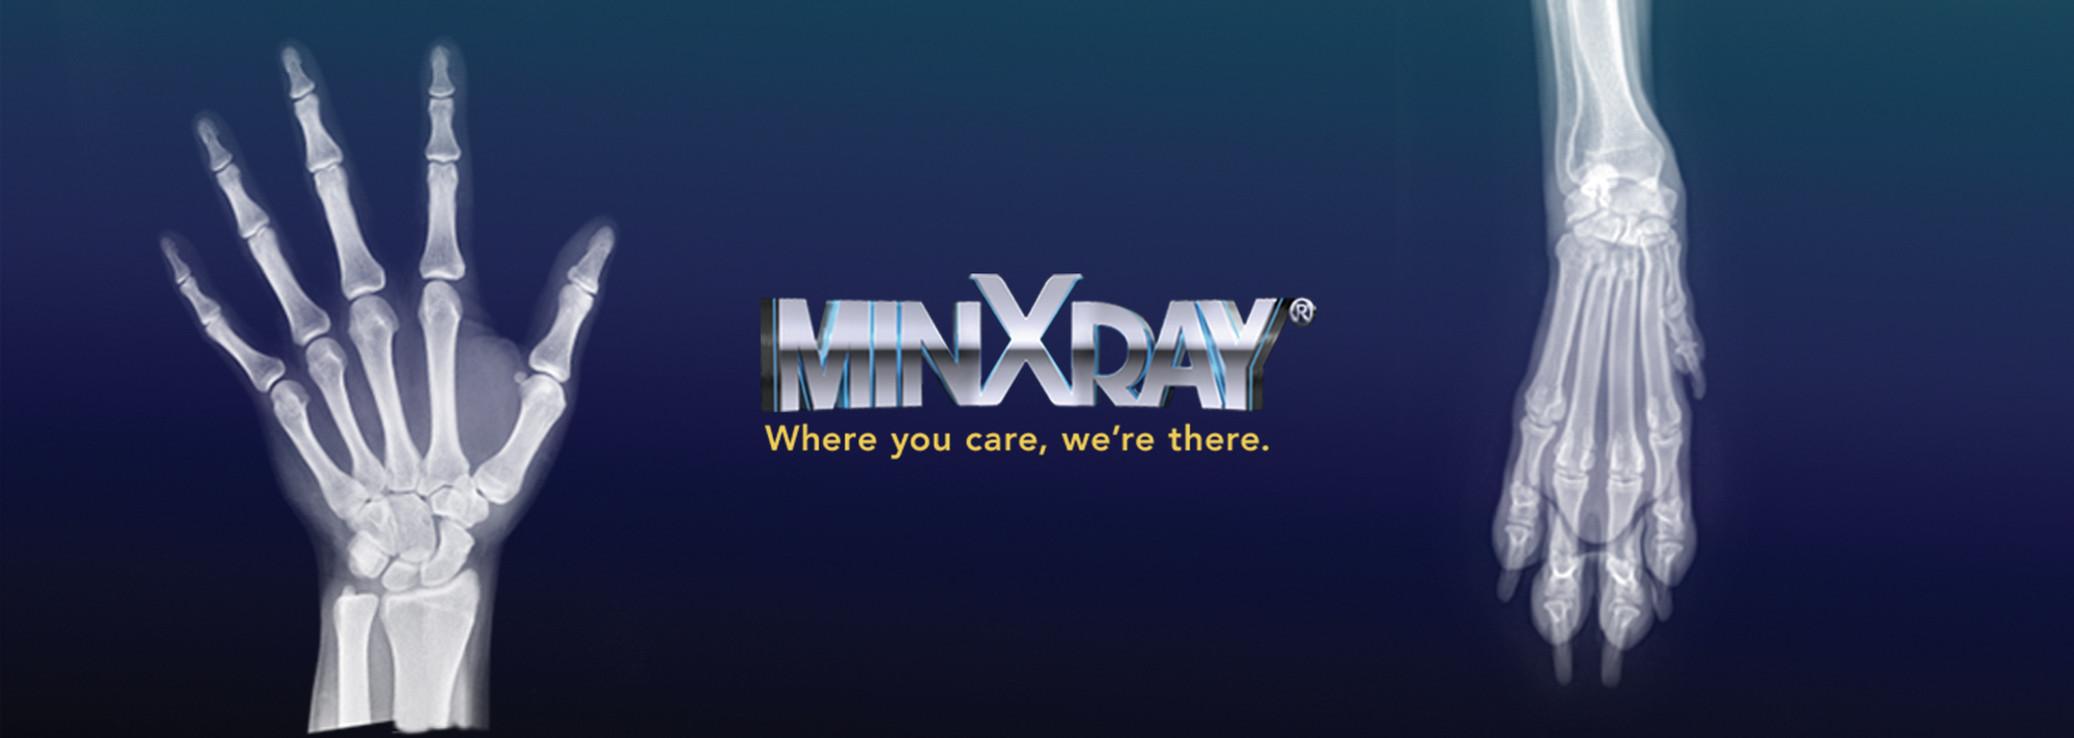 Product Service Request Form for MinXray Products image